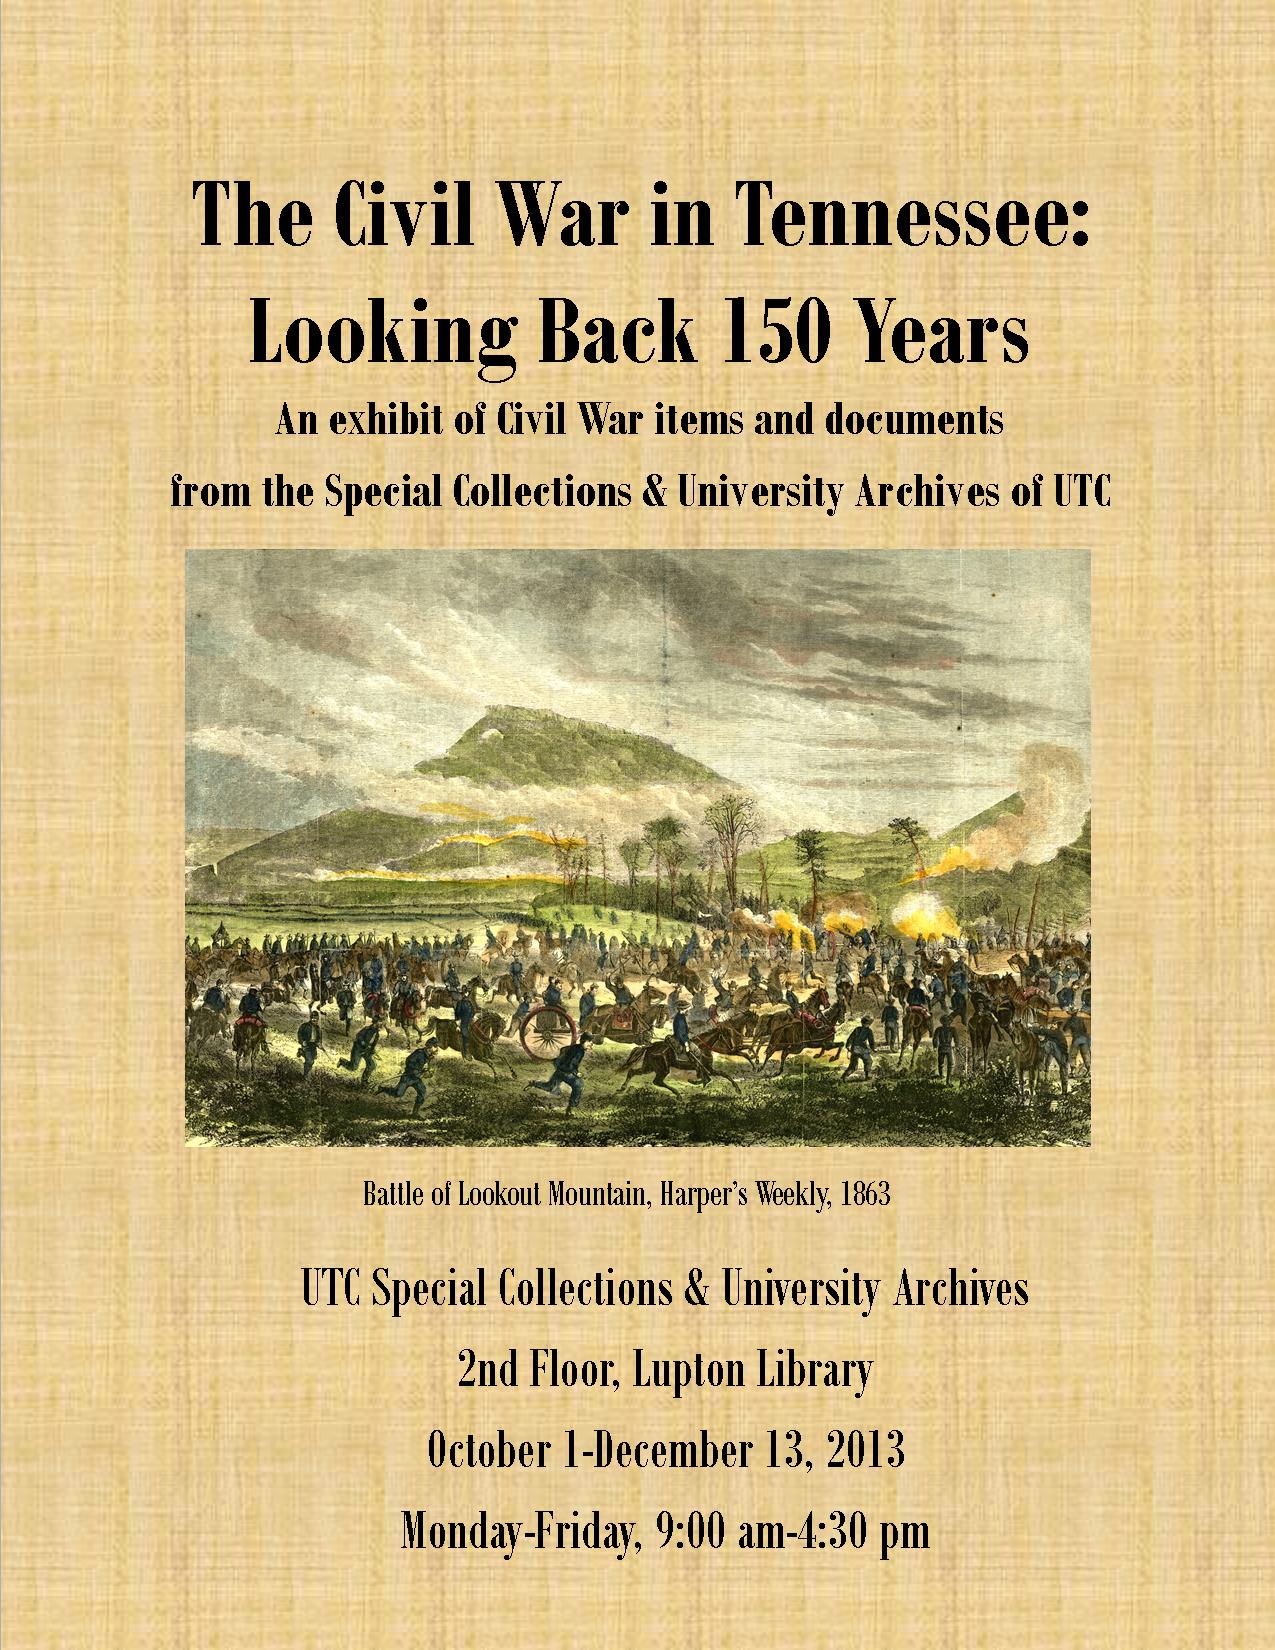 Celebrate the centennial anniversary with our new exhibit, The Civil War in Tennessee: Looking Back 150 Years.